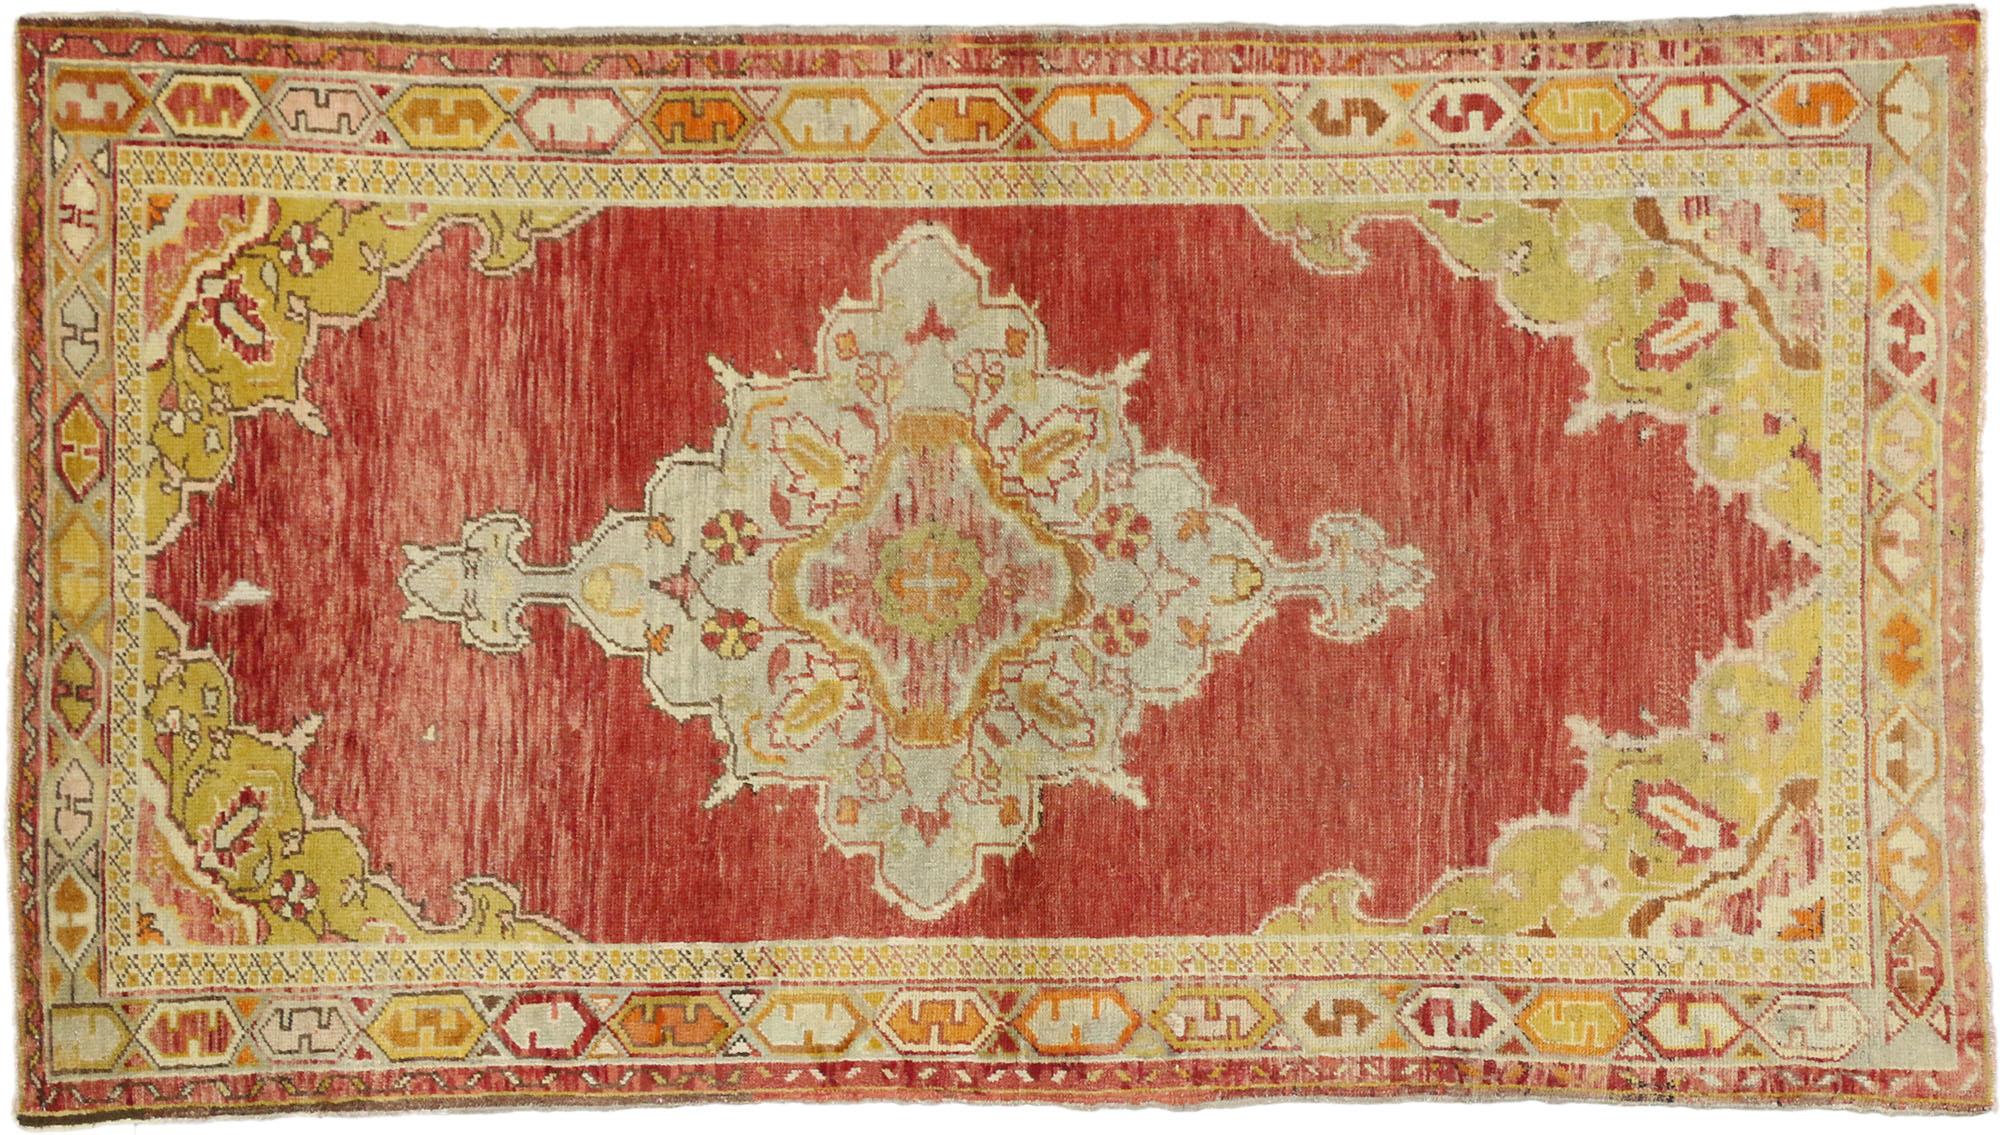 50669 Vintage Turkish Oushak Rug with Traditional Rustic Style 03'07 x 06'06. Warm and inviting, this hand-knotted wool vintage Turkish Oushak rug features an ornate centre medallion in an open abrashed brick red field. Each corner spandrel is